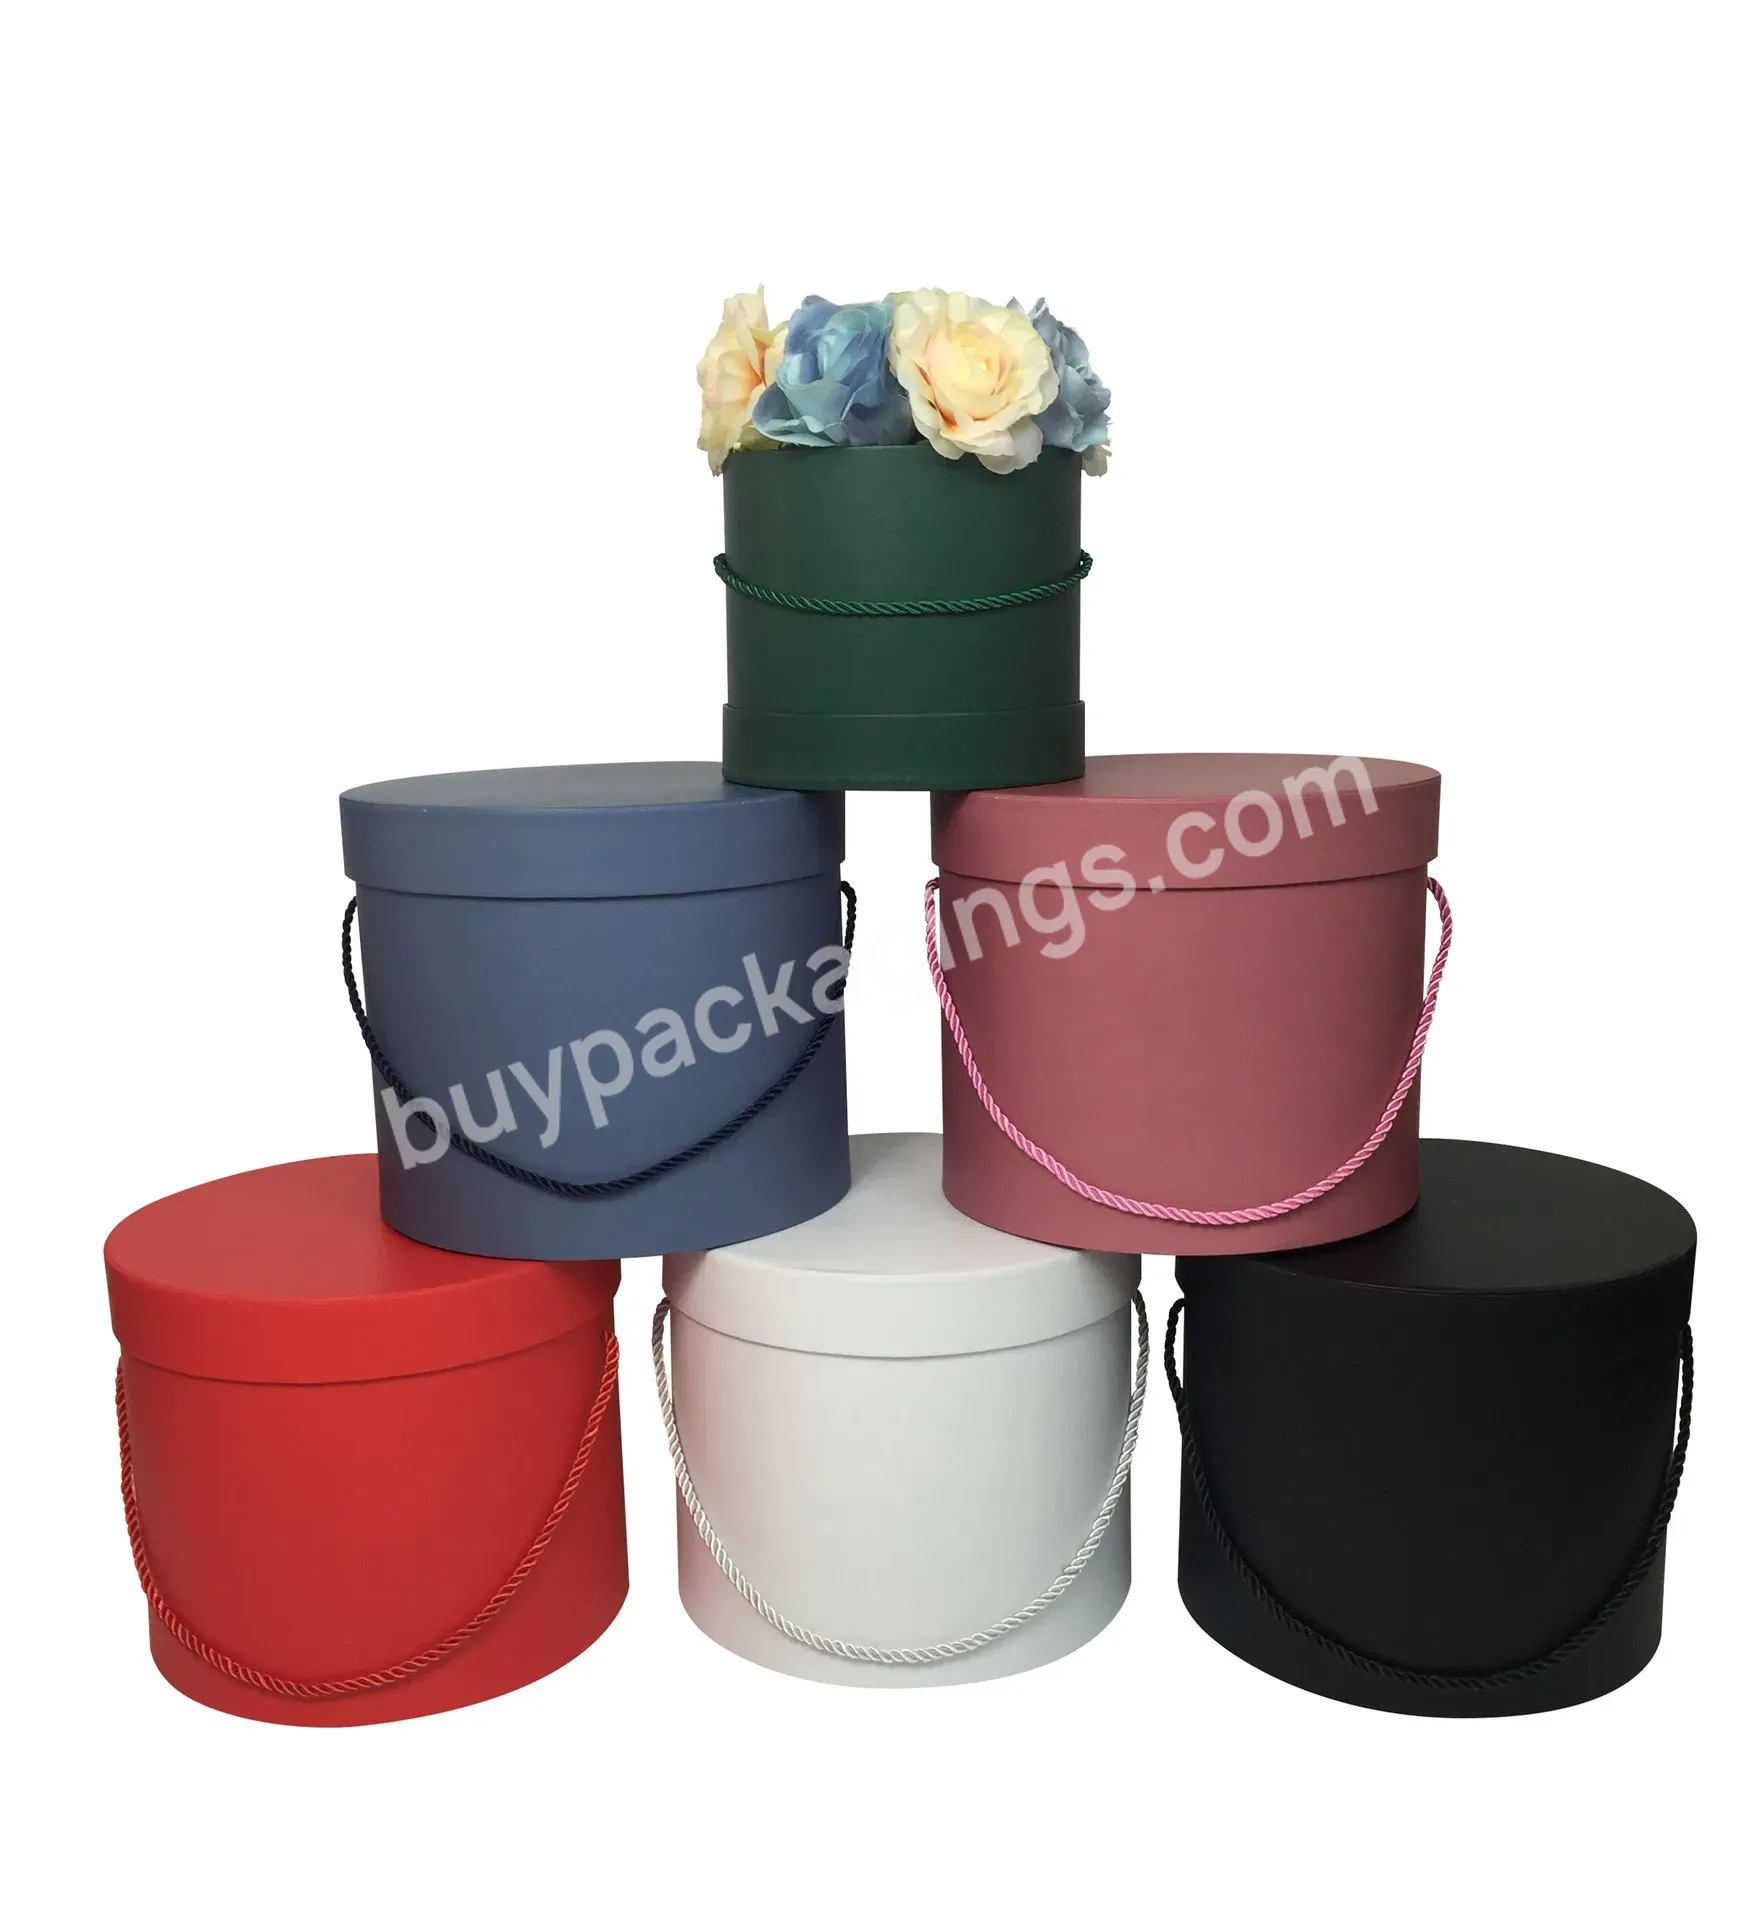 Hot Selling 3pcs/set Round Hug Bucket Gift Box Portable Flower Box With Hand Rope For Valentine's Day - Buy Hot Selling 3pcs/set Round Hug Bucket Gift Box,Portable Flower Box With Hand Rope,Flower Box With Hand Rope For Valentine's Day.